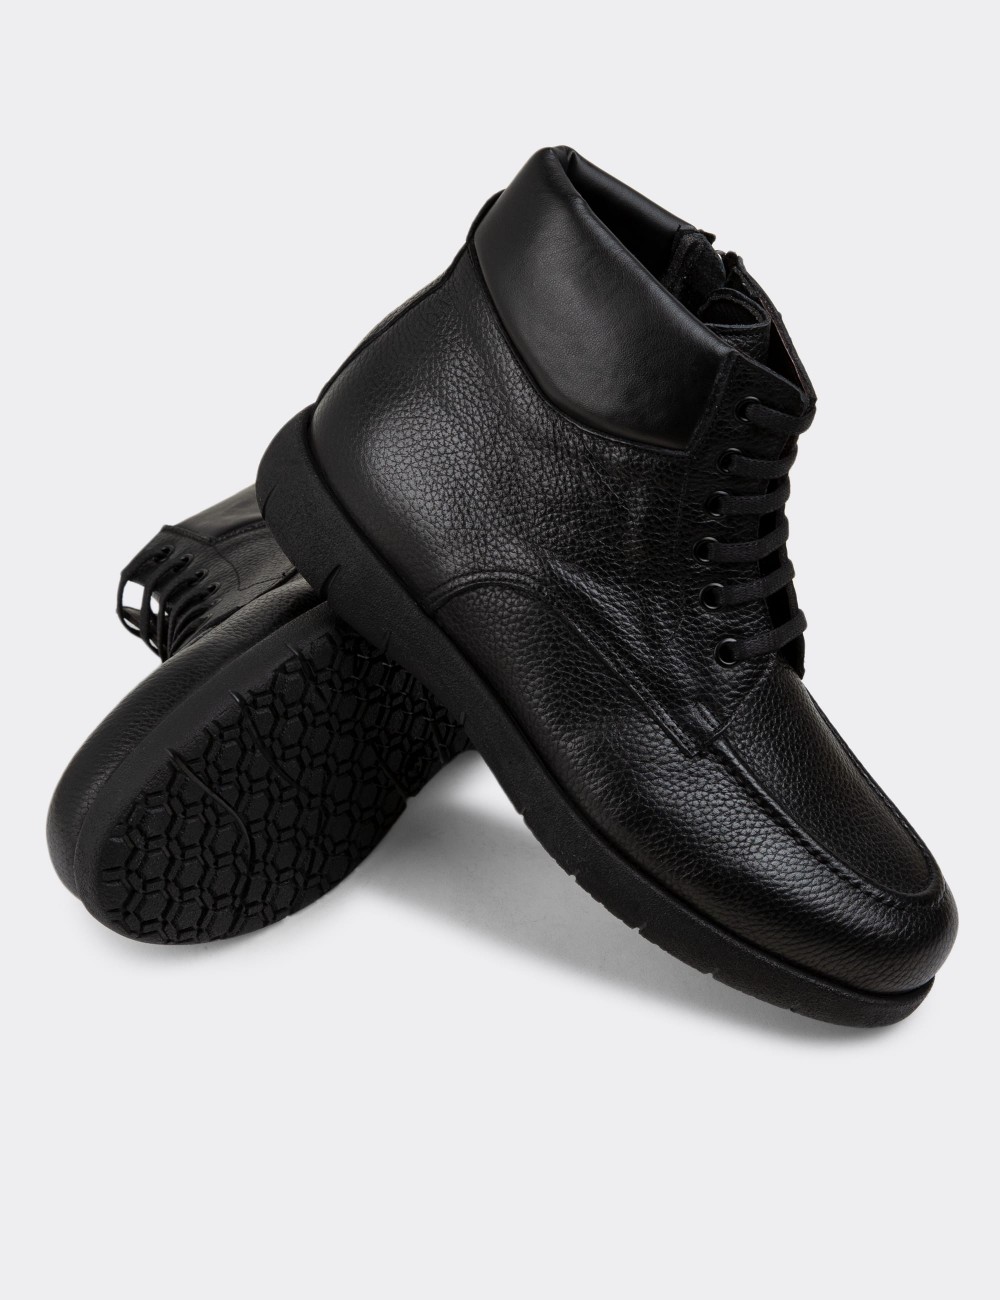 Black Leather Boots - 01929MSYHC01